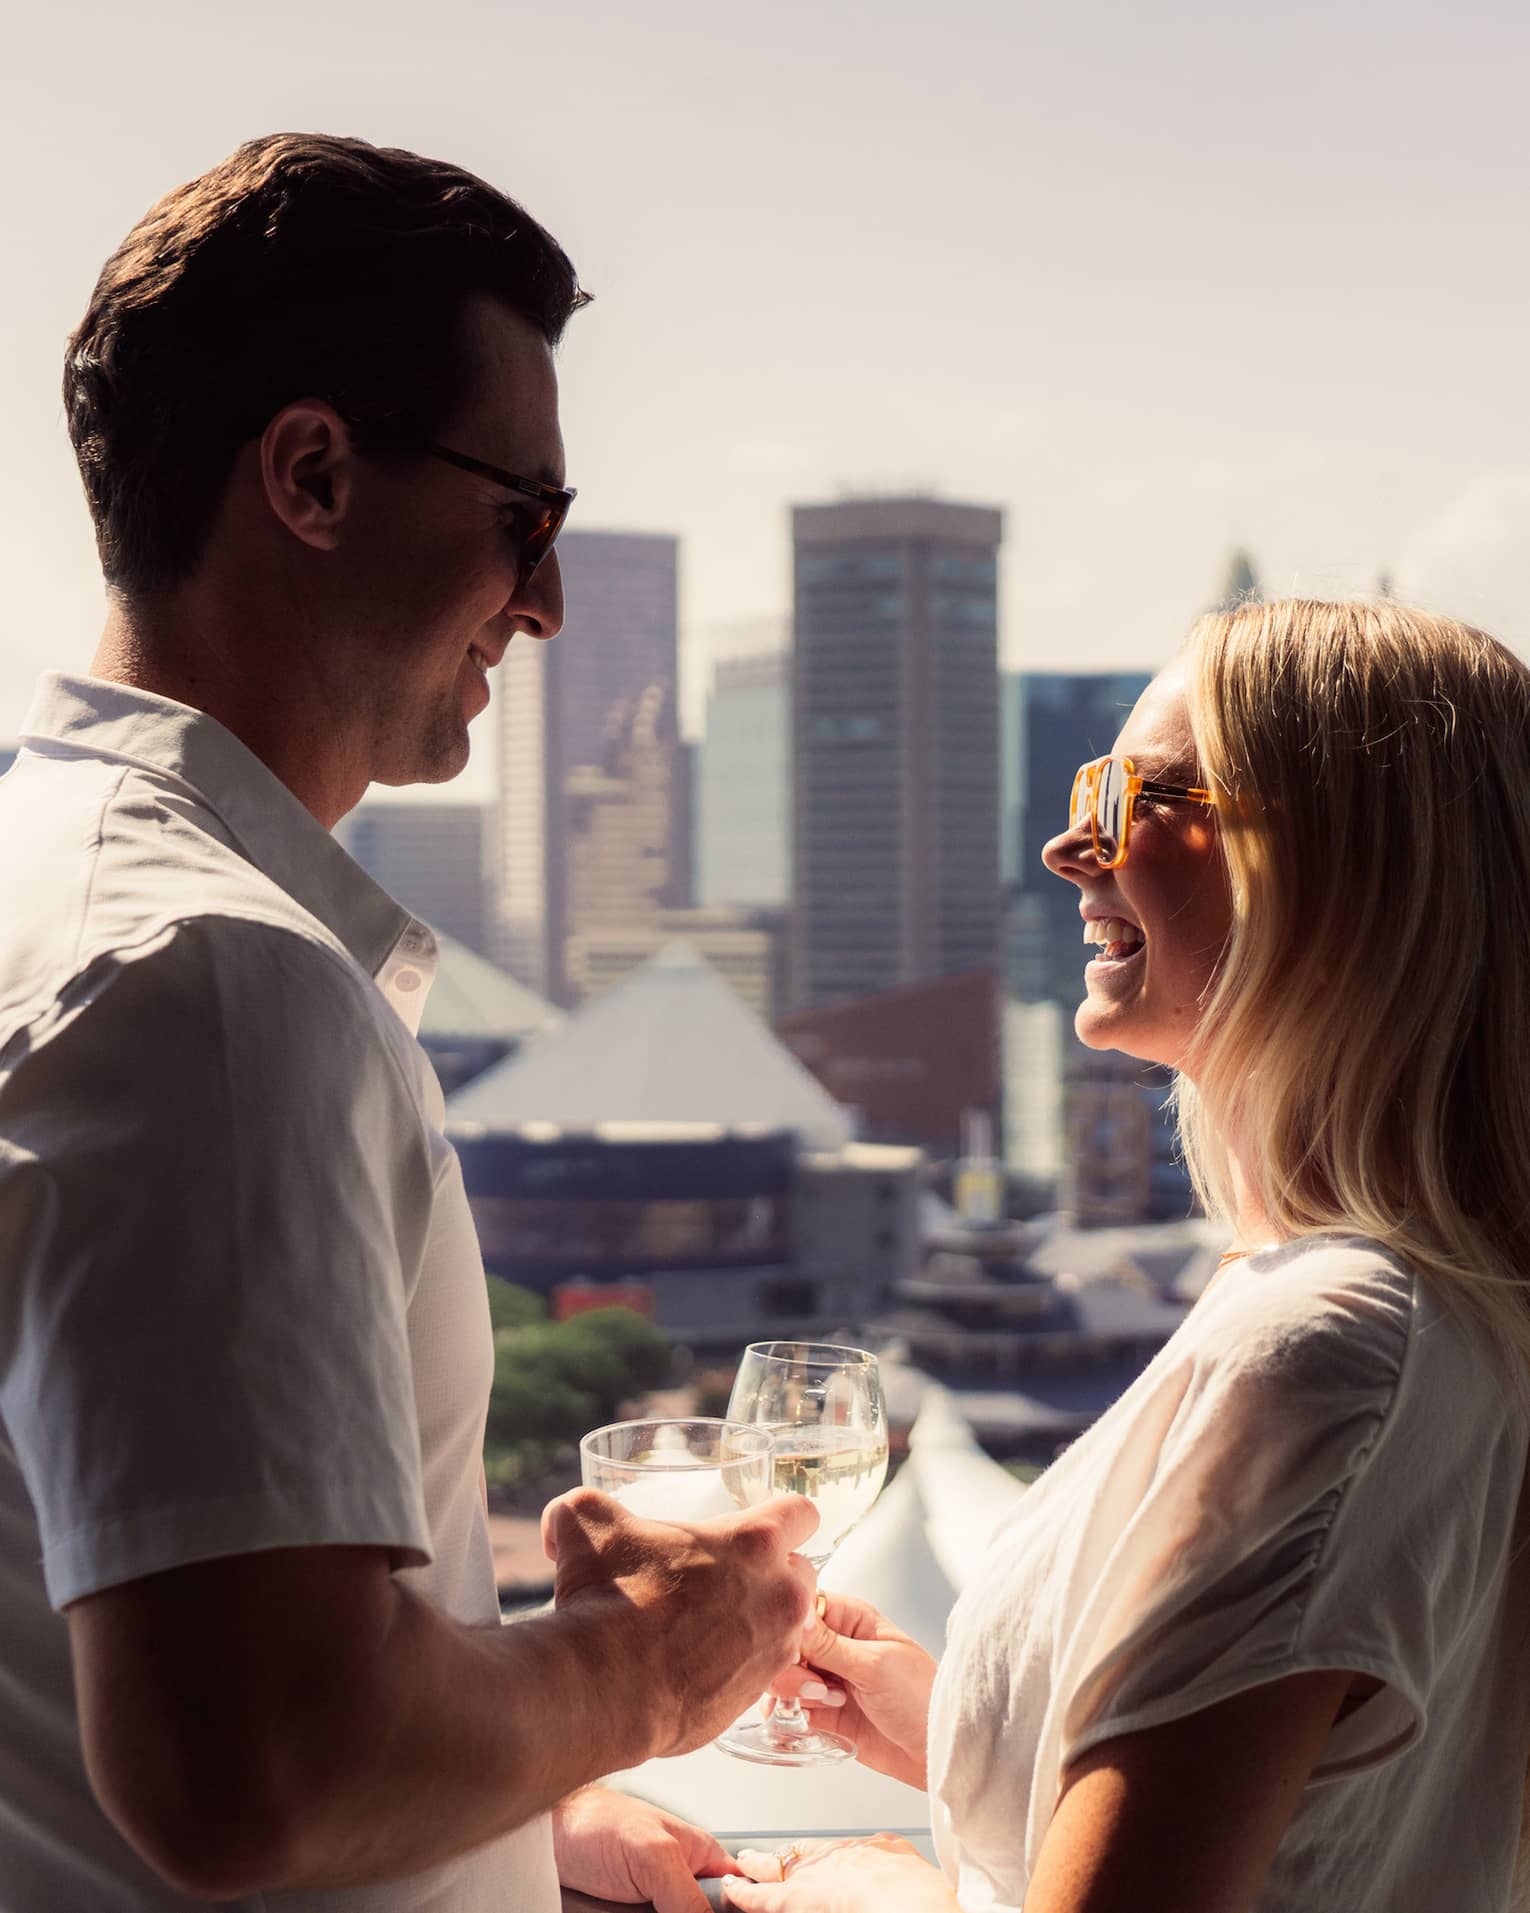 A man and woman drinking on a balcony overlooking water and a city.